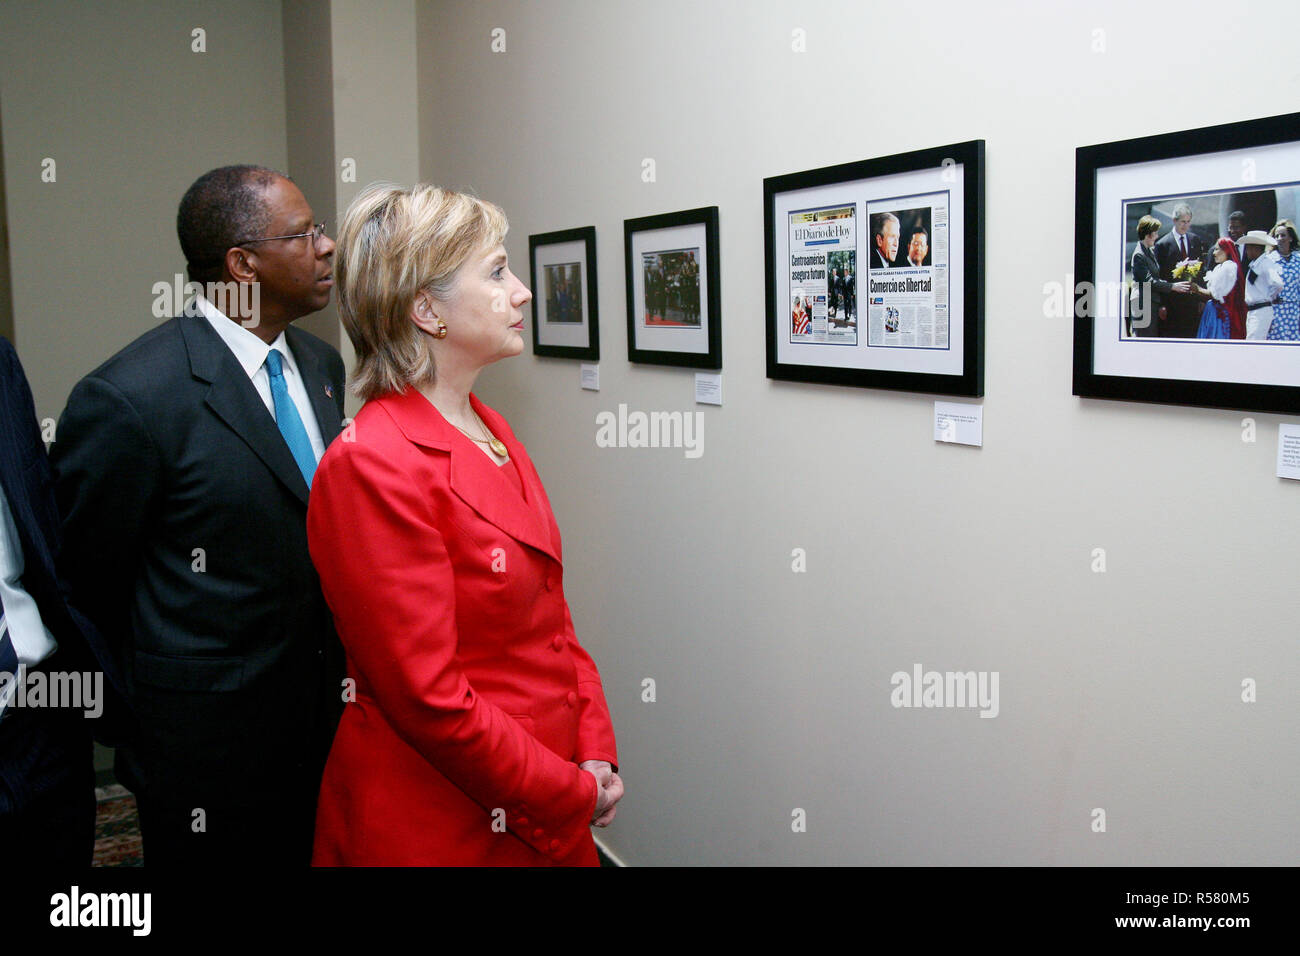 U.S. Secretary of State Hillary Rodham Clinton observes some historical pictures displayed at the U.S. Embassy San Salvador photo exhibition entitled “The United States and El Salvador, An Enduring Relationship” in San Salvador Stock Photo